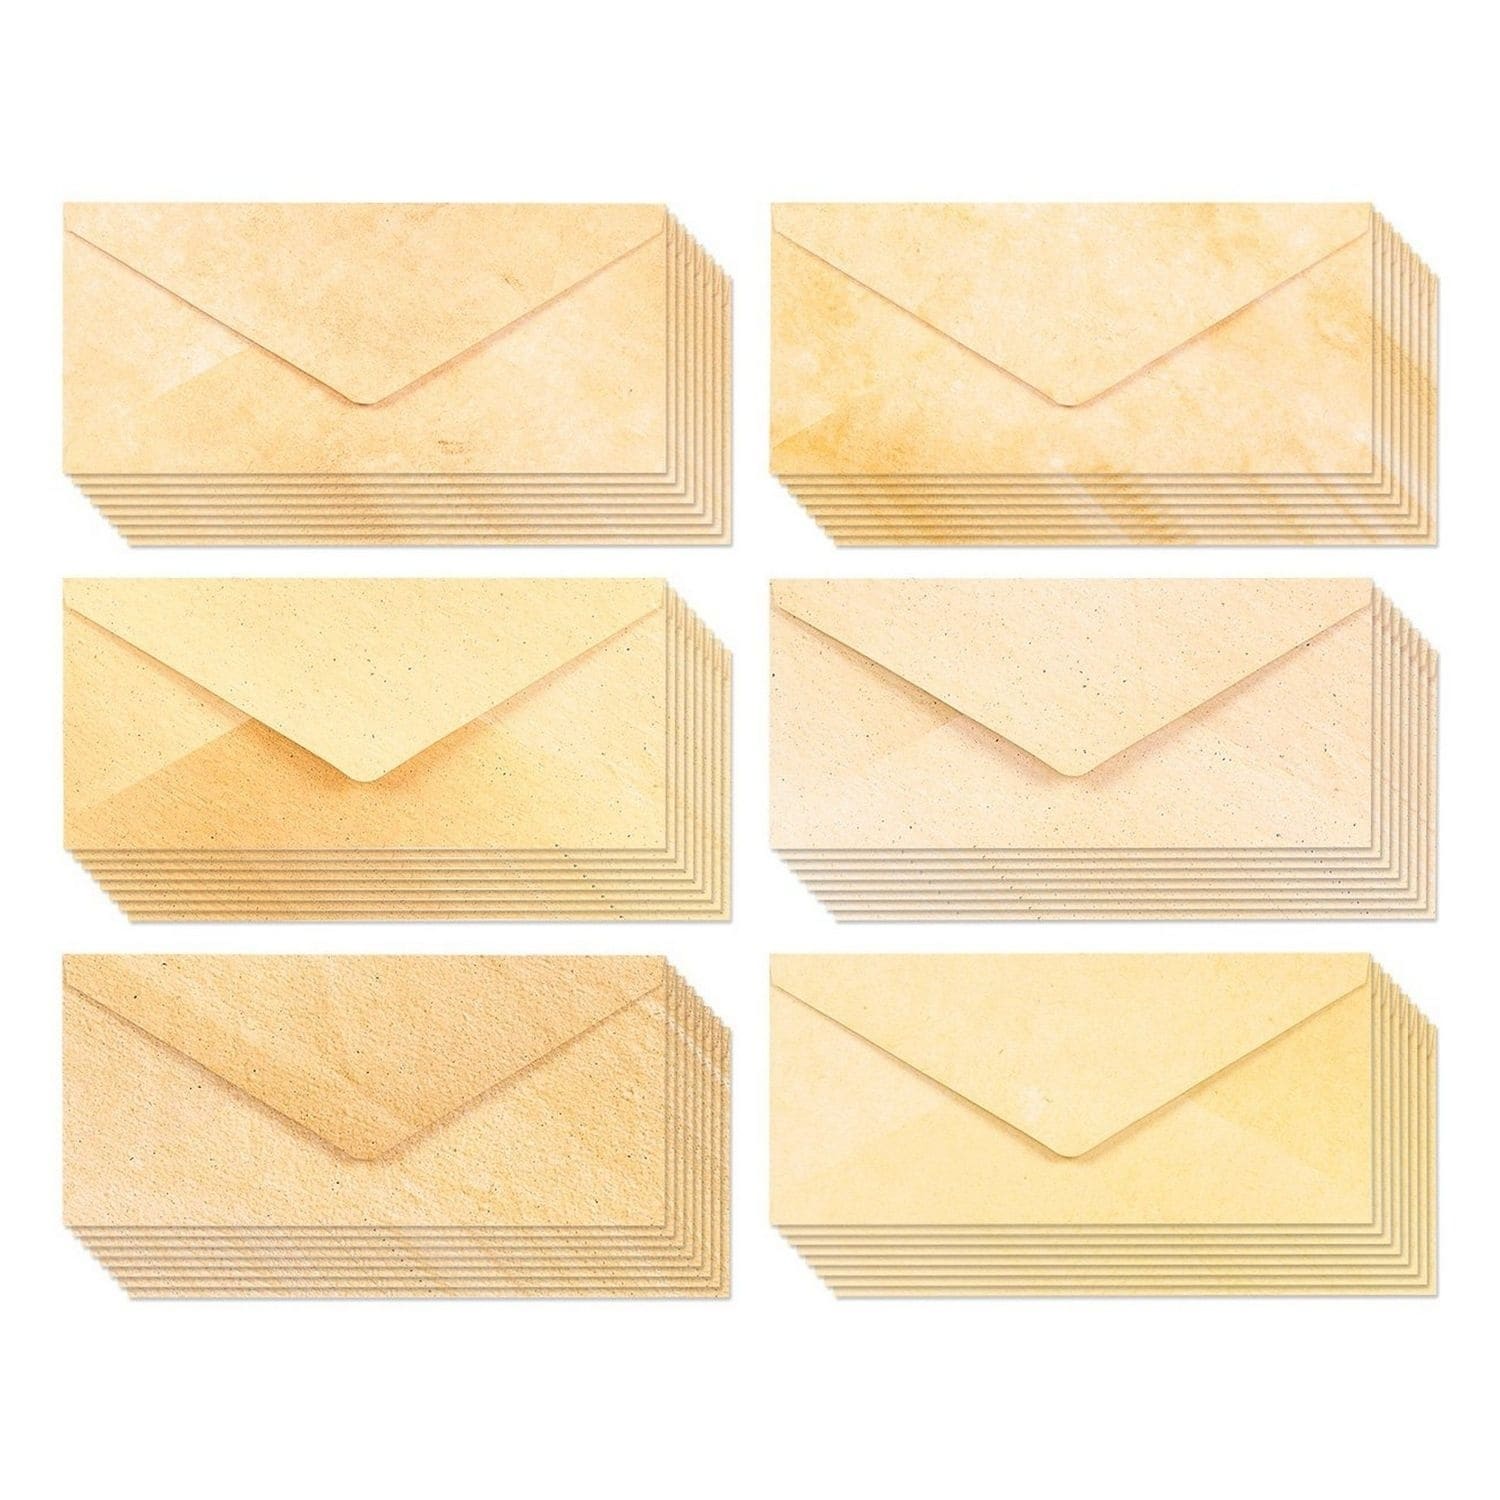 48 Pack Aged Antique Stationery Envelopes - Classic Old Fashioned Value Pack